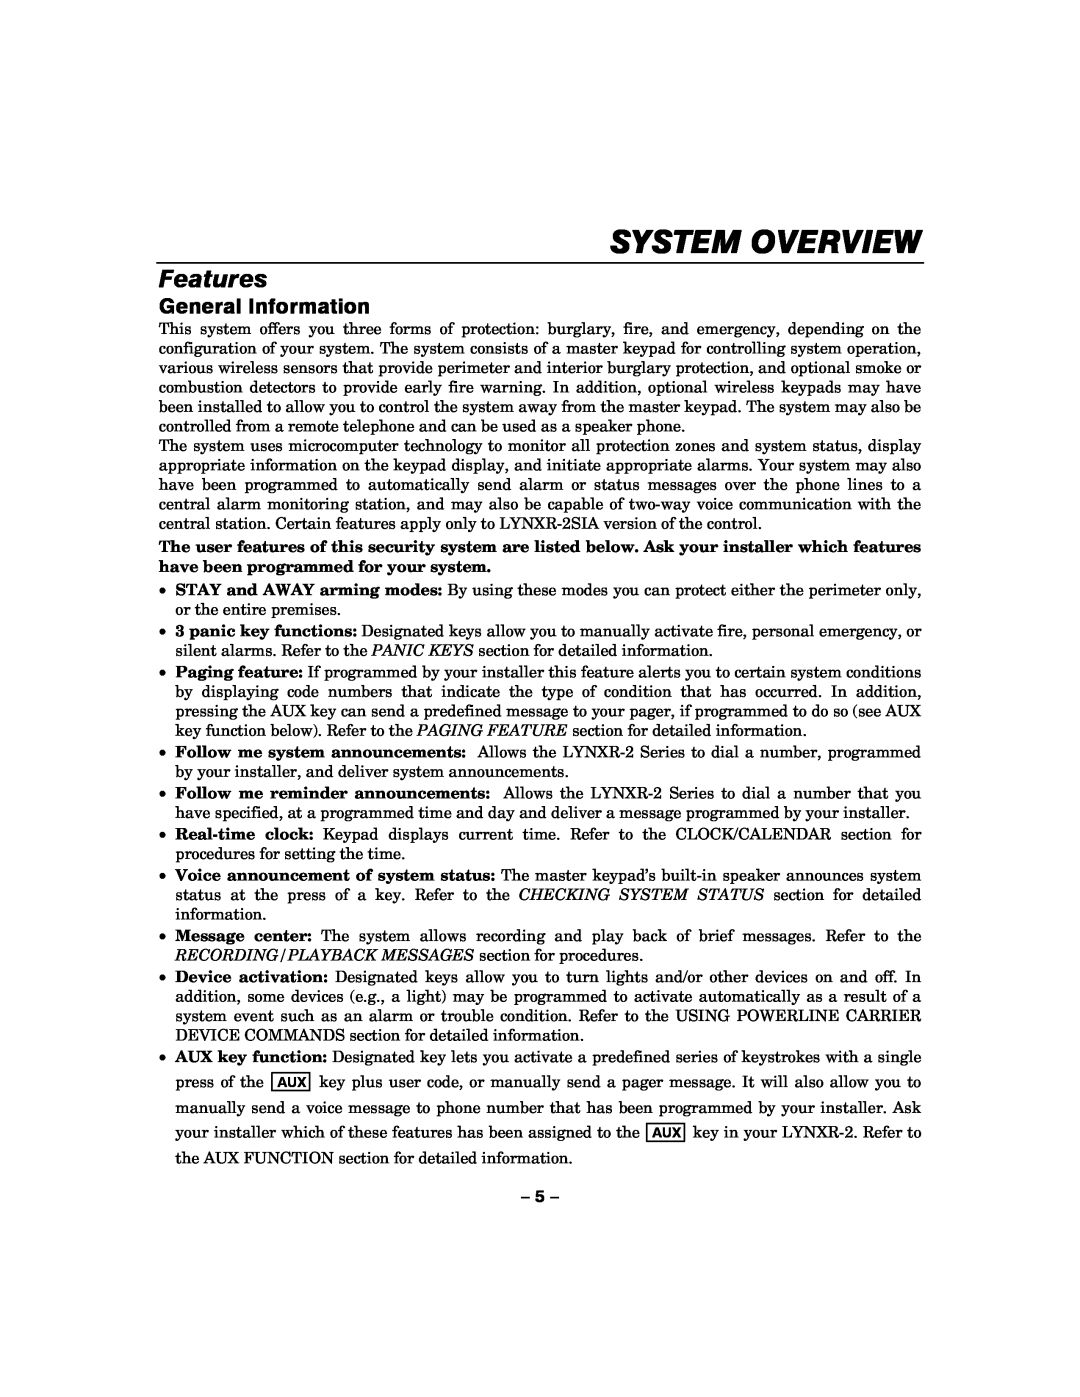 Honeywell LYNXR-2 manual System Overview, Features, General Information, 5 